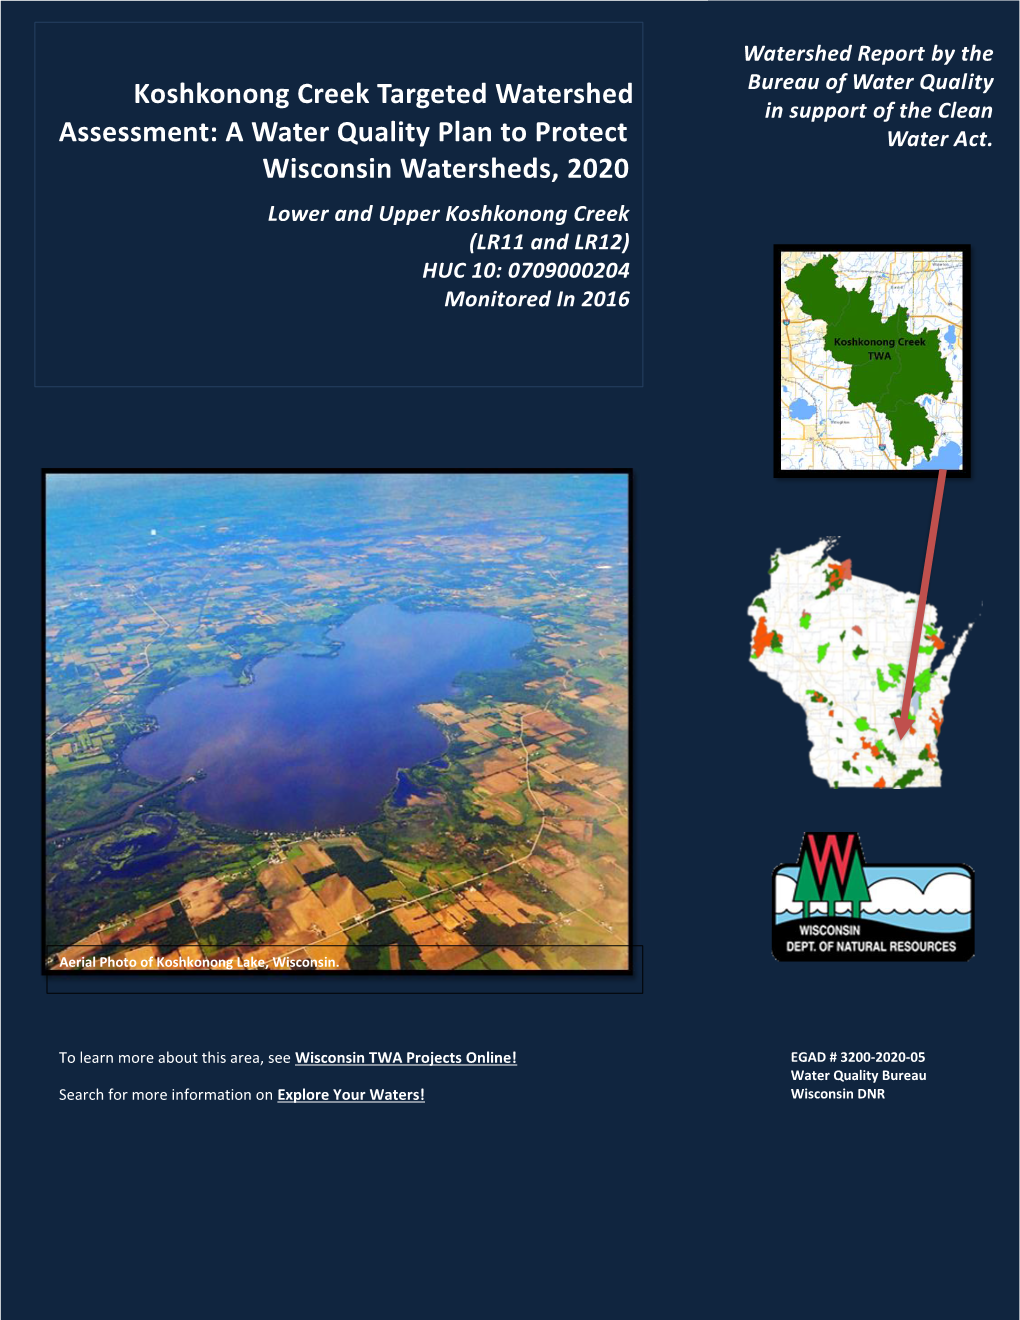 Koshkonong Creek Targeted Watershed Assessment: a Water Quality Plan to Protect March 23, 2020 Wisconsin Watersheds, 2020